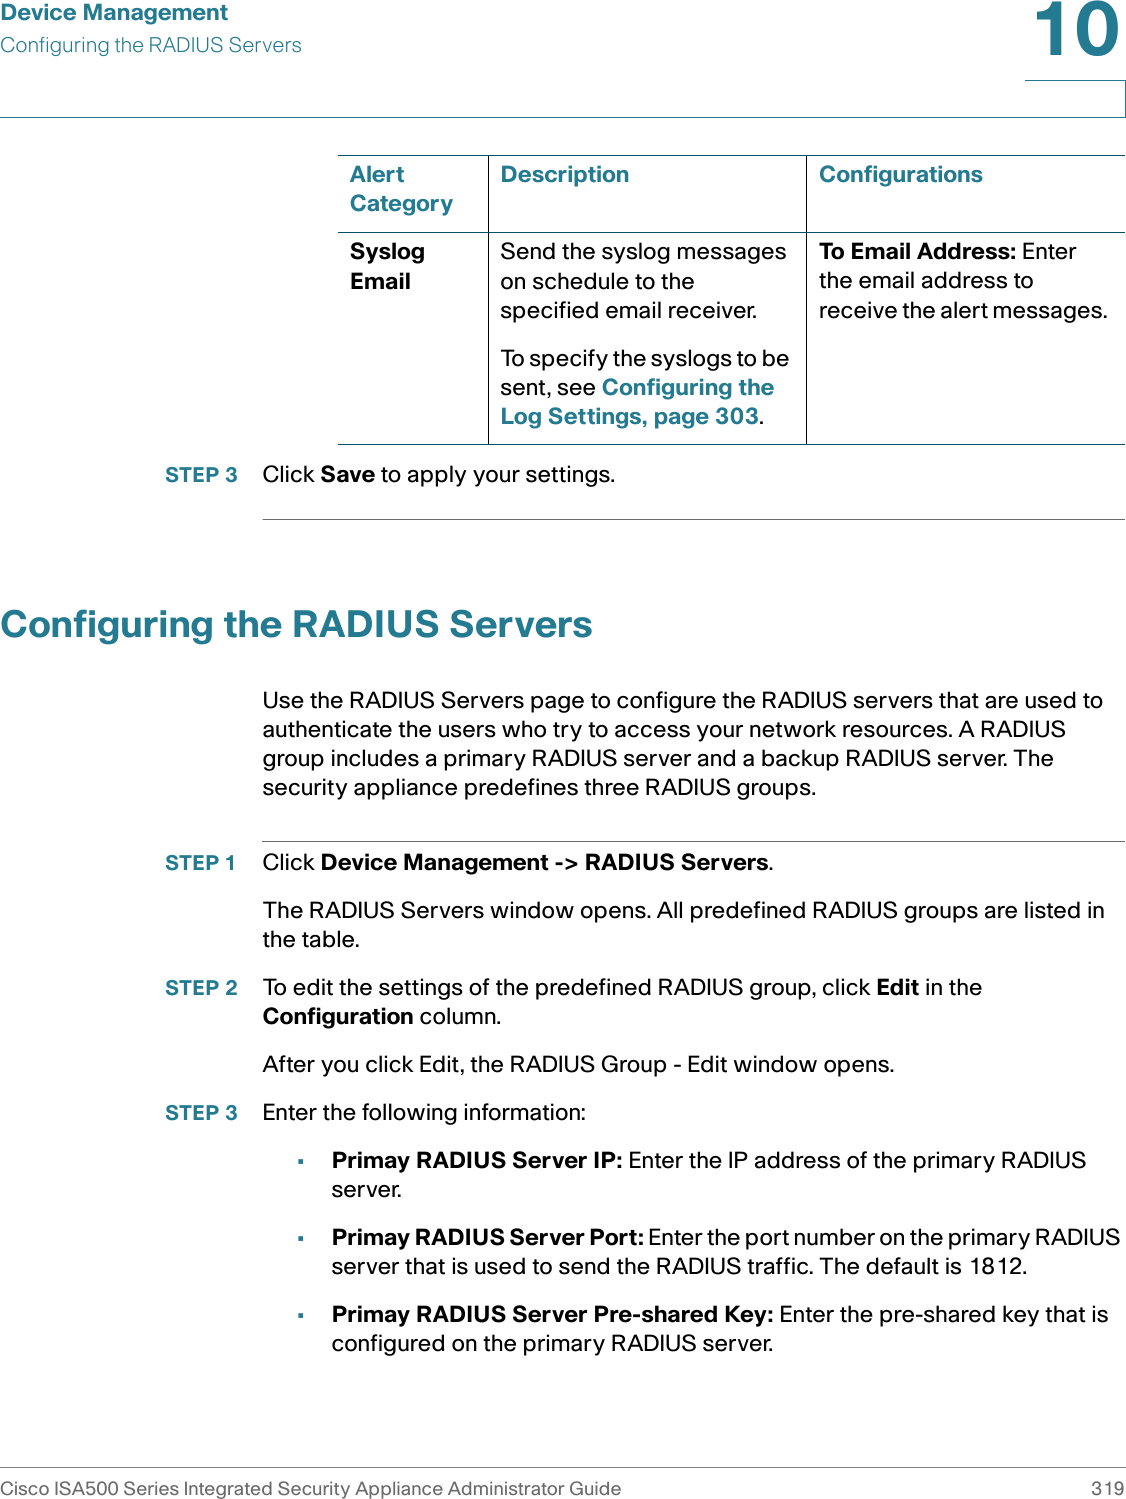 Device ManagementConfiguring the RADIUS ServersCisco ISA500 Series Integrated Security Appliance Administrator Guide 31910 STEP 3 Click Save to apply your settings. Configuring the RADIUS ServersUse the RADIUS Servers page to configure the RADIUS servers that are used to authenticate the users who try to access your network resources. A RADIUS group includes a primary RADIUS server and a backup RADIUS server. The security appliance predefines three RADIUS groups. STEP 1 Click Device Management -&gt; RADIUS Servers.The RADIUS Servers window opens. All predefined RADIUS groups are listed in the table. STEP 2 To edit the settings of the predefined RADIUS group, click Edit in the Configuration column. After you click Edit, the RADIUS Group - Edit window opens. STEP 3 Enter the following information: •Primay RADIUS Server IP: Enter the IP address of the primary RADIUS server. •Primay RADIUS Server Port: Enter the port number on the primary RADIUS server that is used to send the RADIUS traffic. The default is 1812.•Primay RADIUS Server Pre-shared Key: Enter the pre-shared key that is configured on the primary RADIUS server. Syslog EmailSend the syslog messages on schedule to the specified email receiver. To specify the syslogs to be sent, see Configuring the Log Settings, page 303. To Email Address: Enter the email address to receive the alert messages. Alert CategoryDescription Configurations